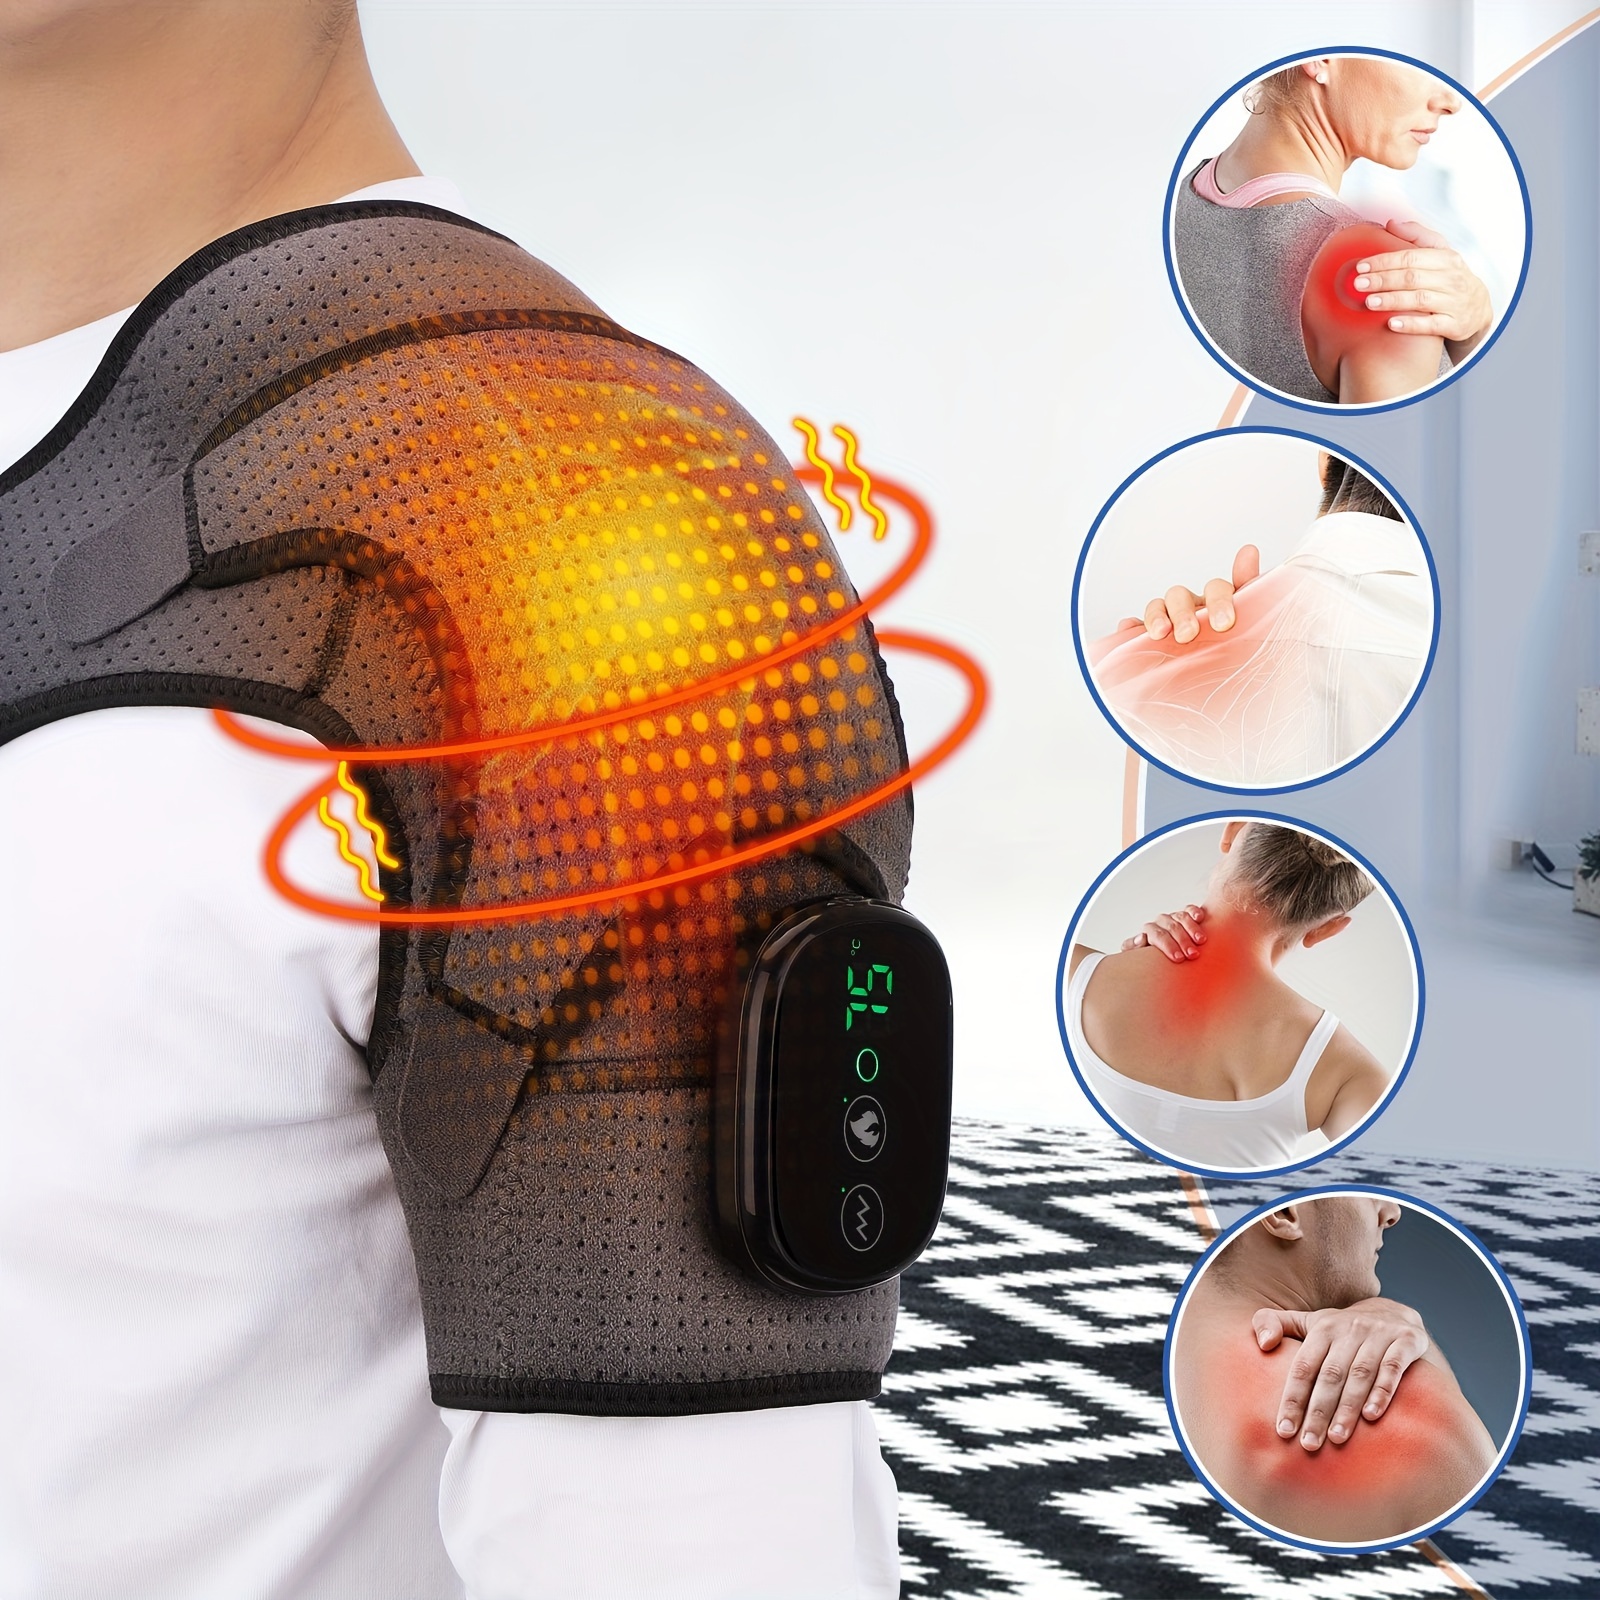 Nooro - Relieve your backpain and tension using our EMS Whole Body Massager  that uses ultra-high frequency vibration! #kneepain #backpain #shoulderpain  #neckpain #physicaltherapy #physiotherapy #painrelief #pain #jointpain  #arthritis #knee #health